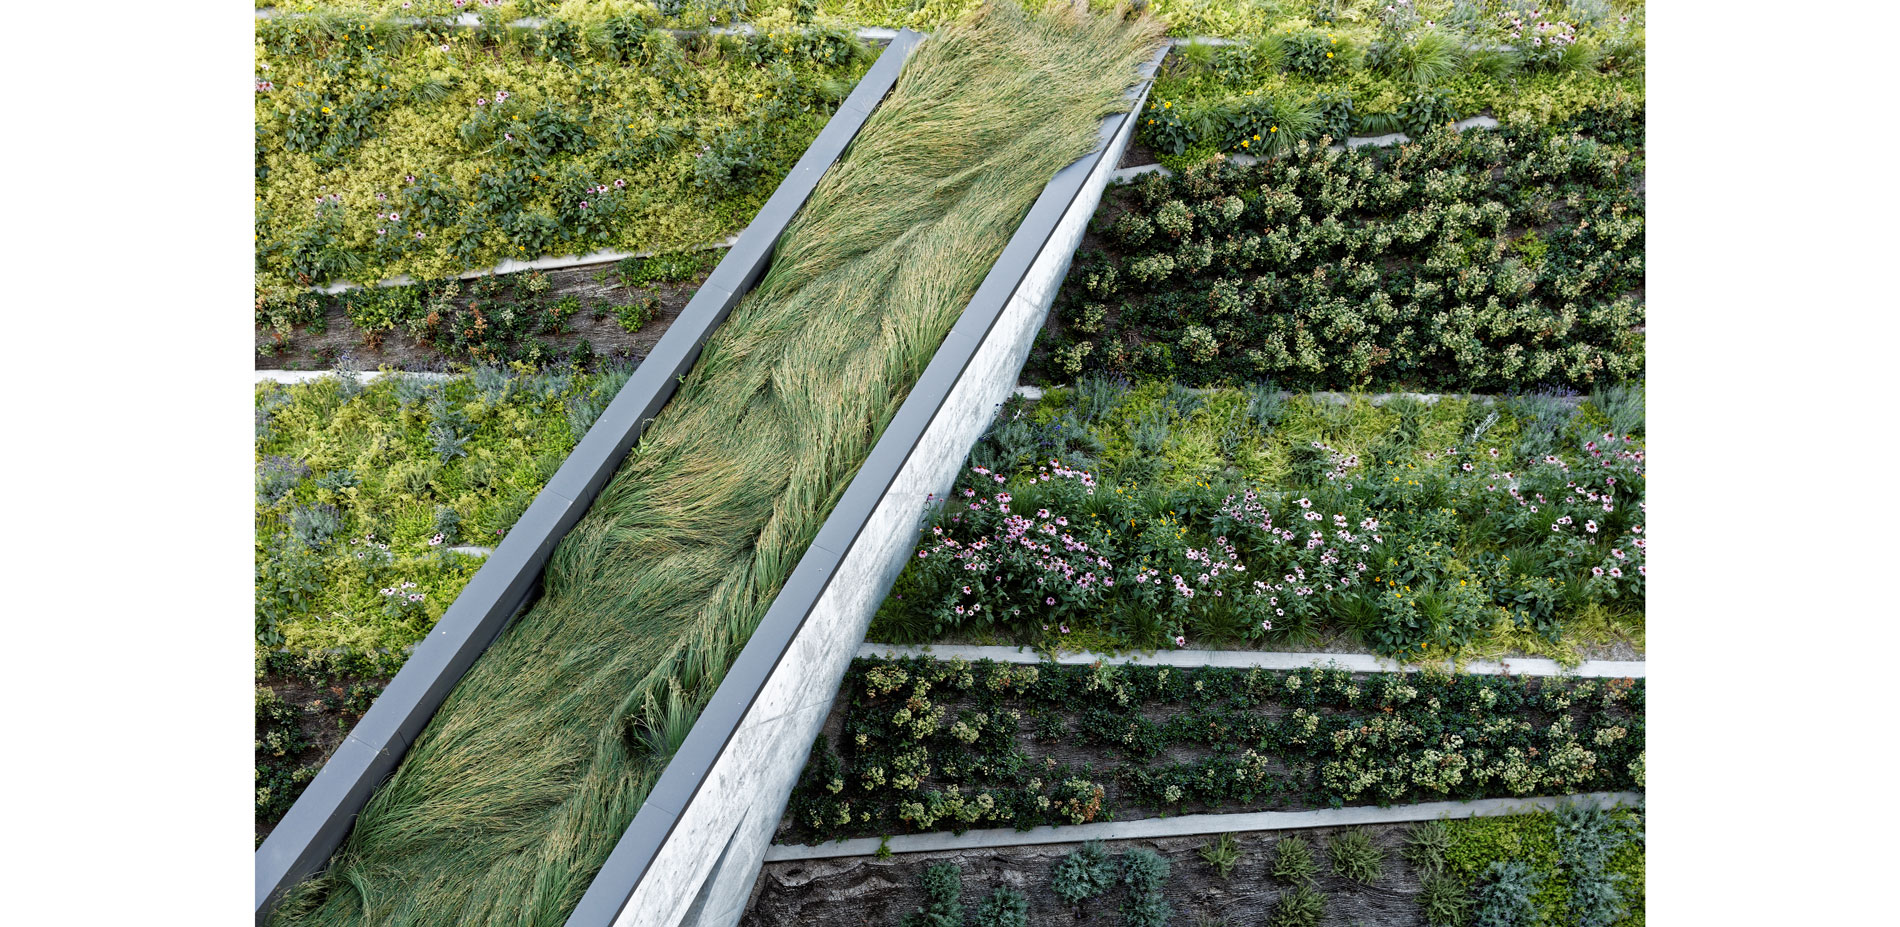 A runnel cuts through planted beds creates distinct textural patterning while managing stormwater from the building’s tower. …